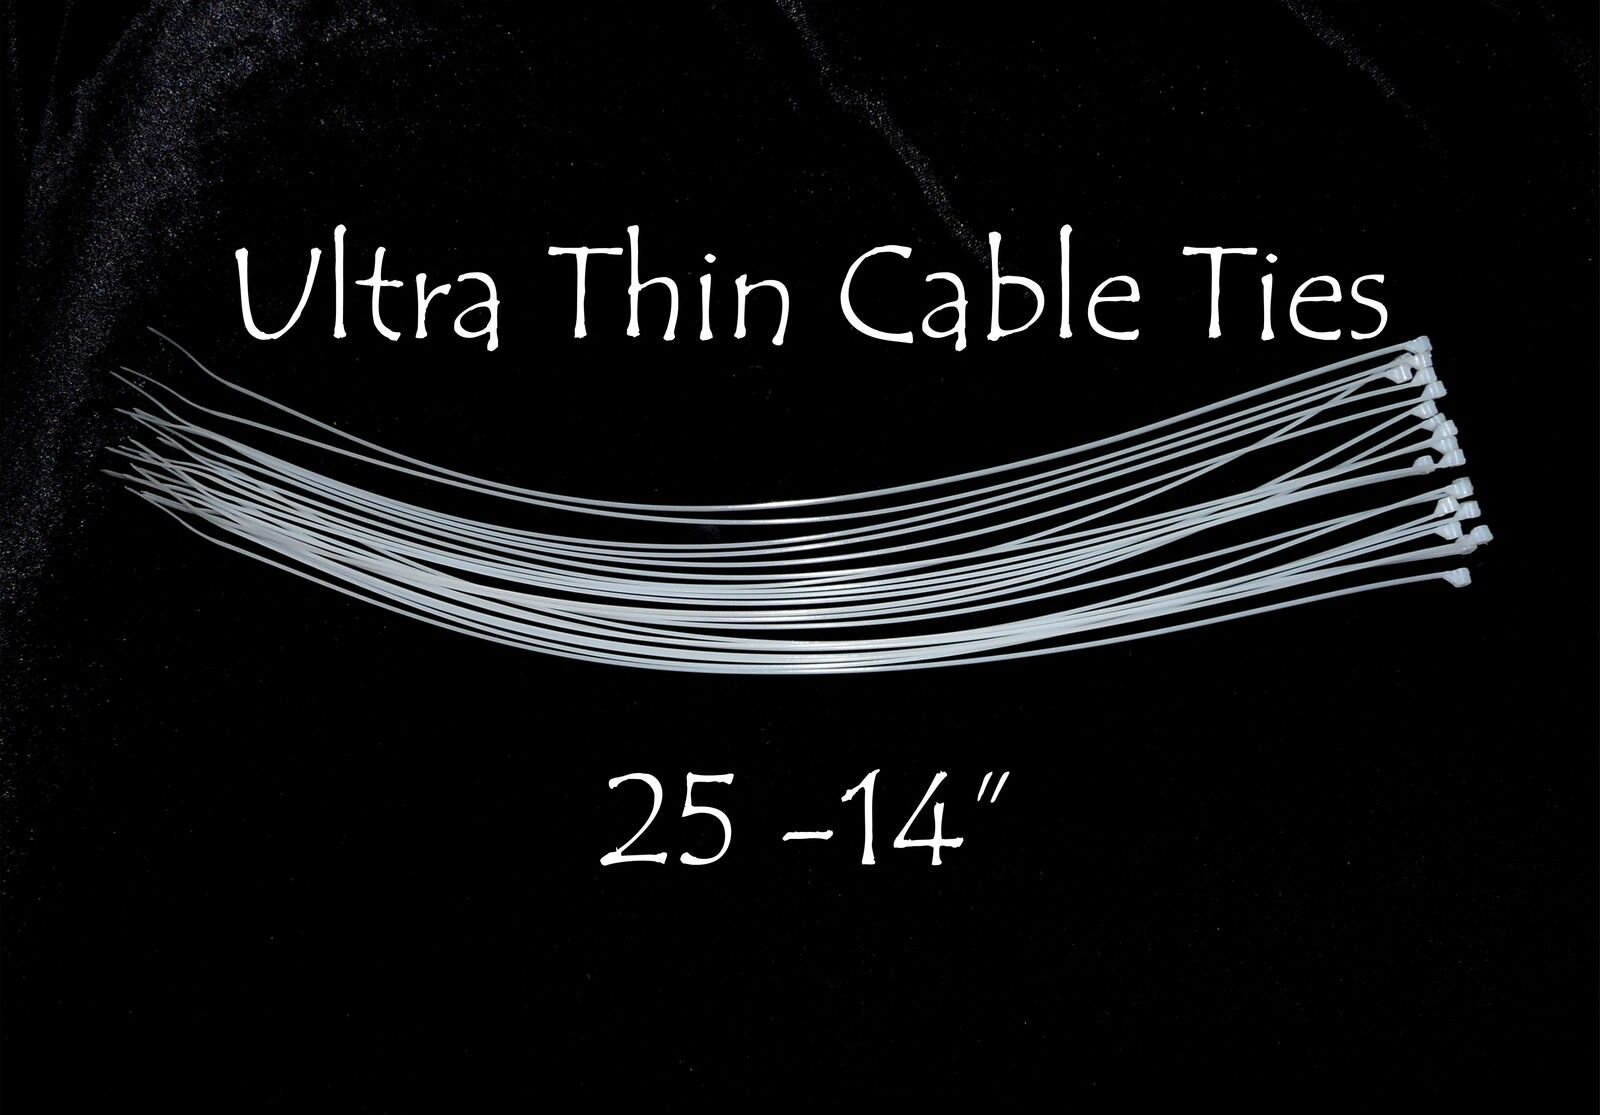 Ultra Thin Cable Ties for Reborn doll supply, 25 -14